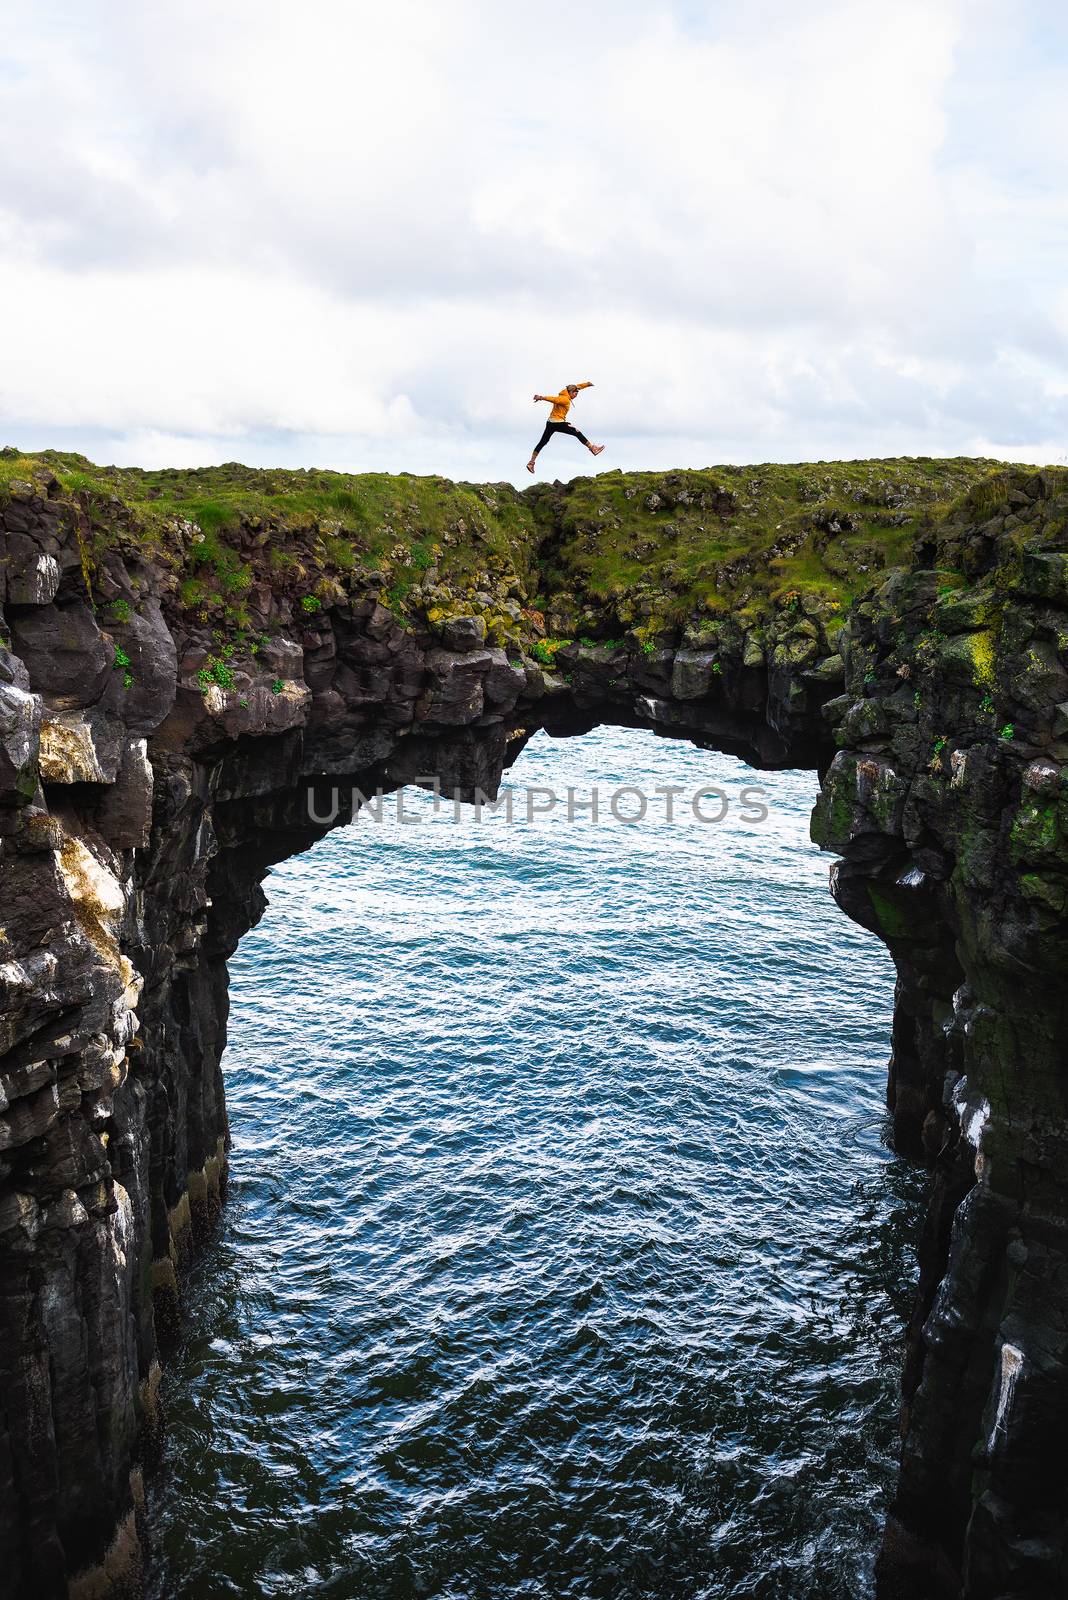 Tourist jumps over a natural rock bridge in Arnarstapi, Iceland by nickfox